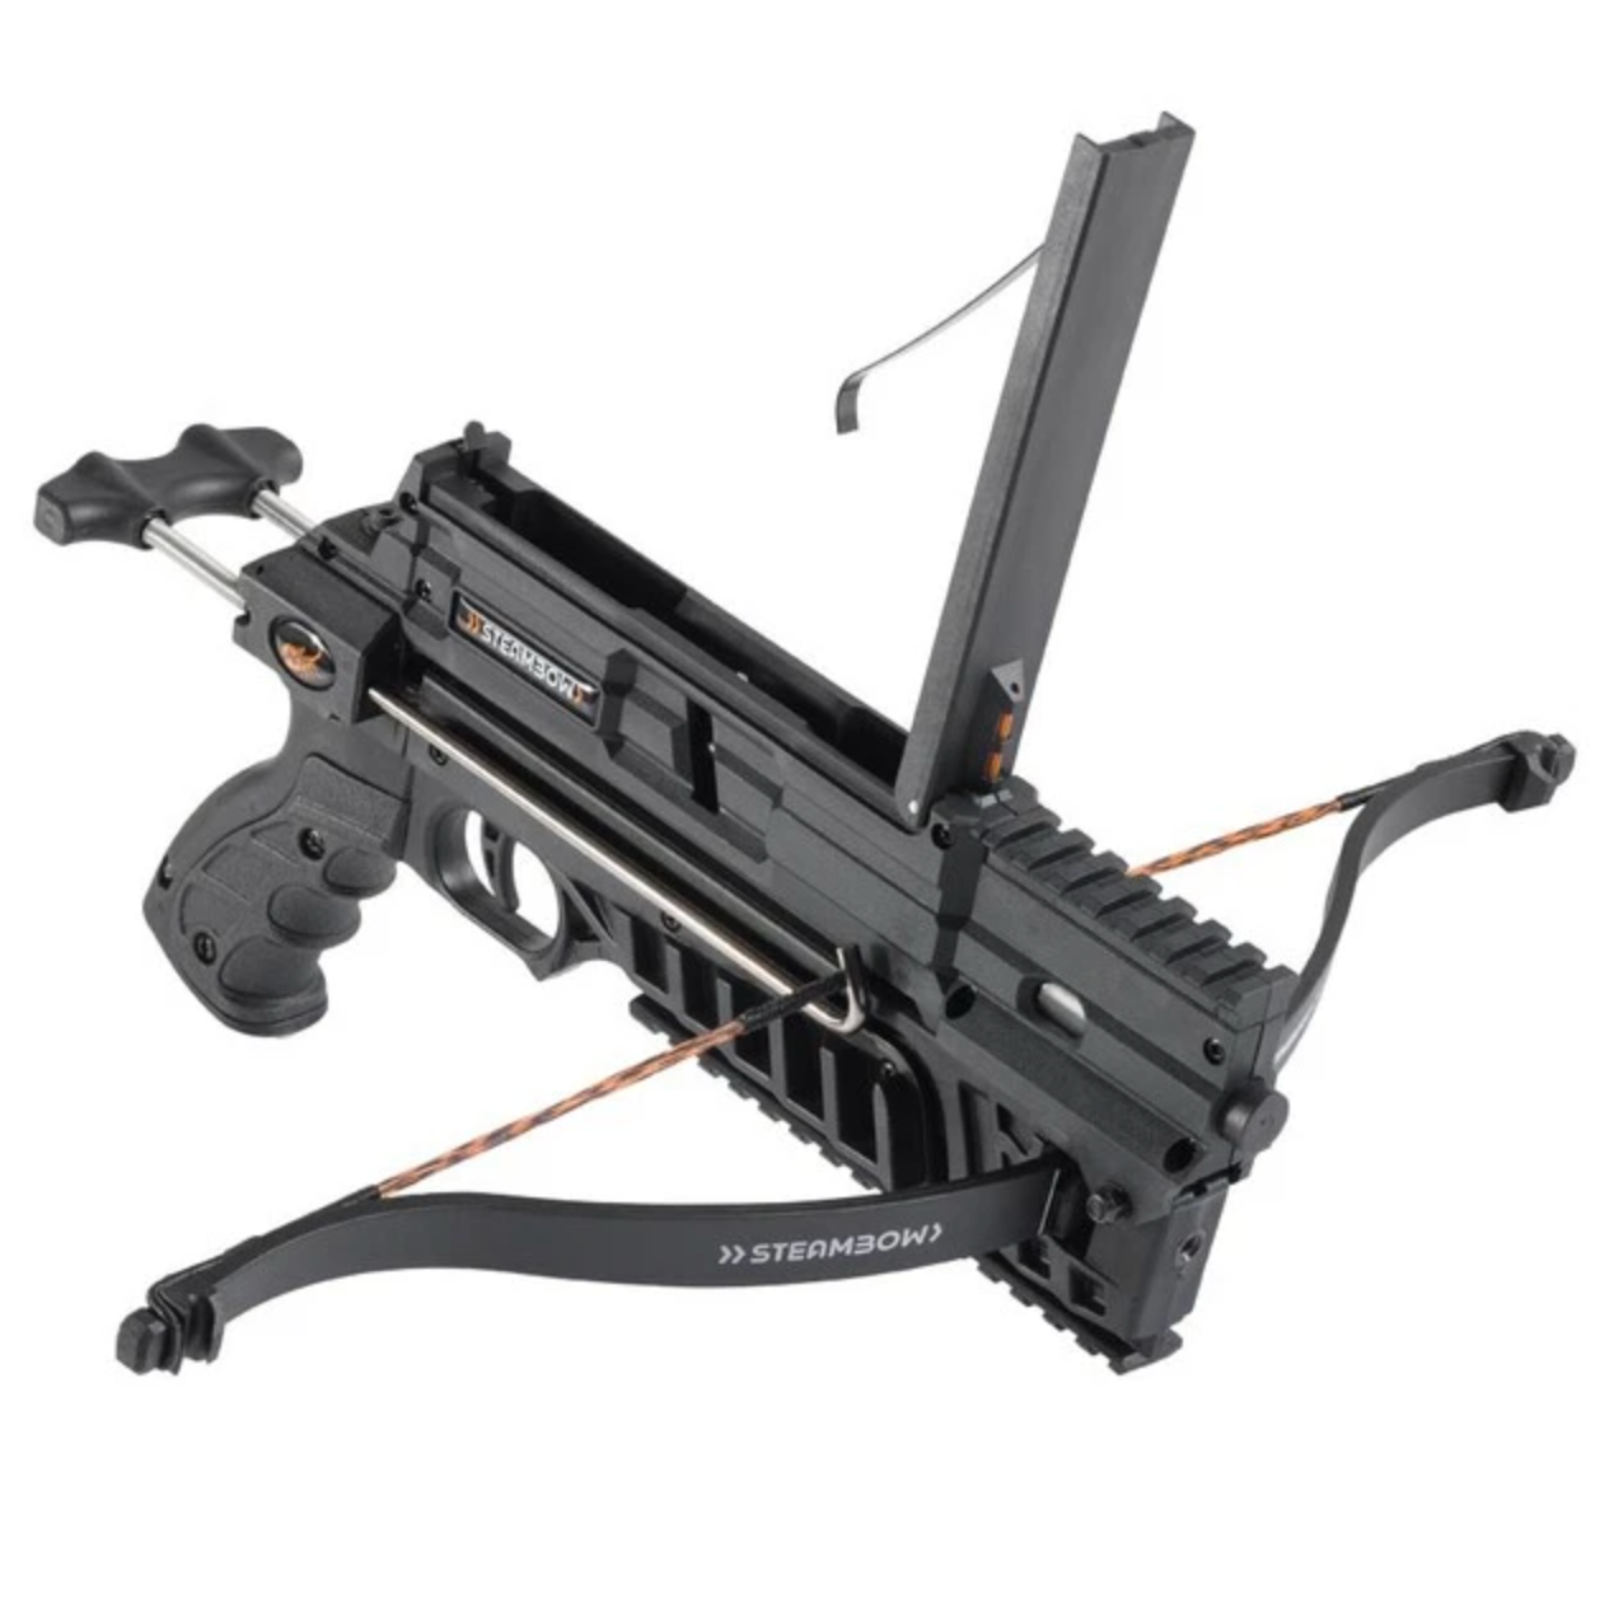 Steambow AR-6 Stinger 2 Compact Pistol Crossbow